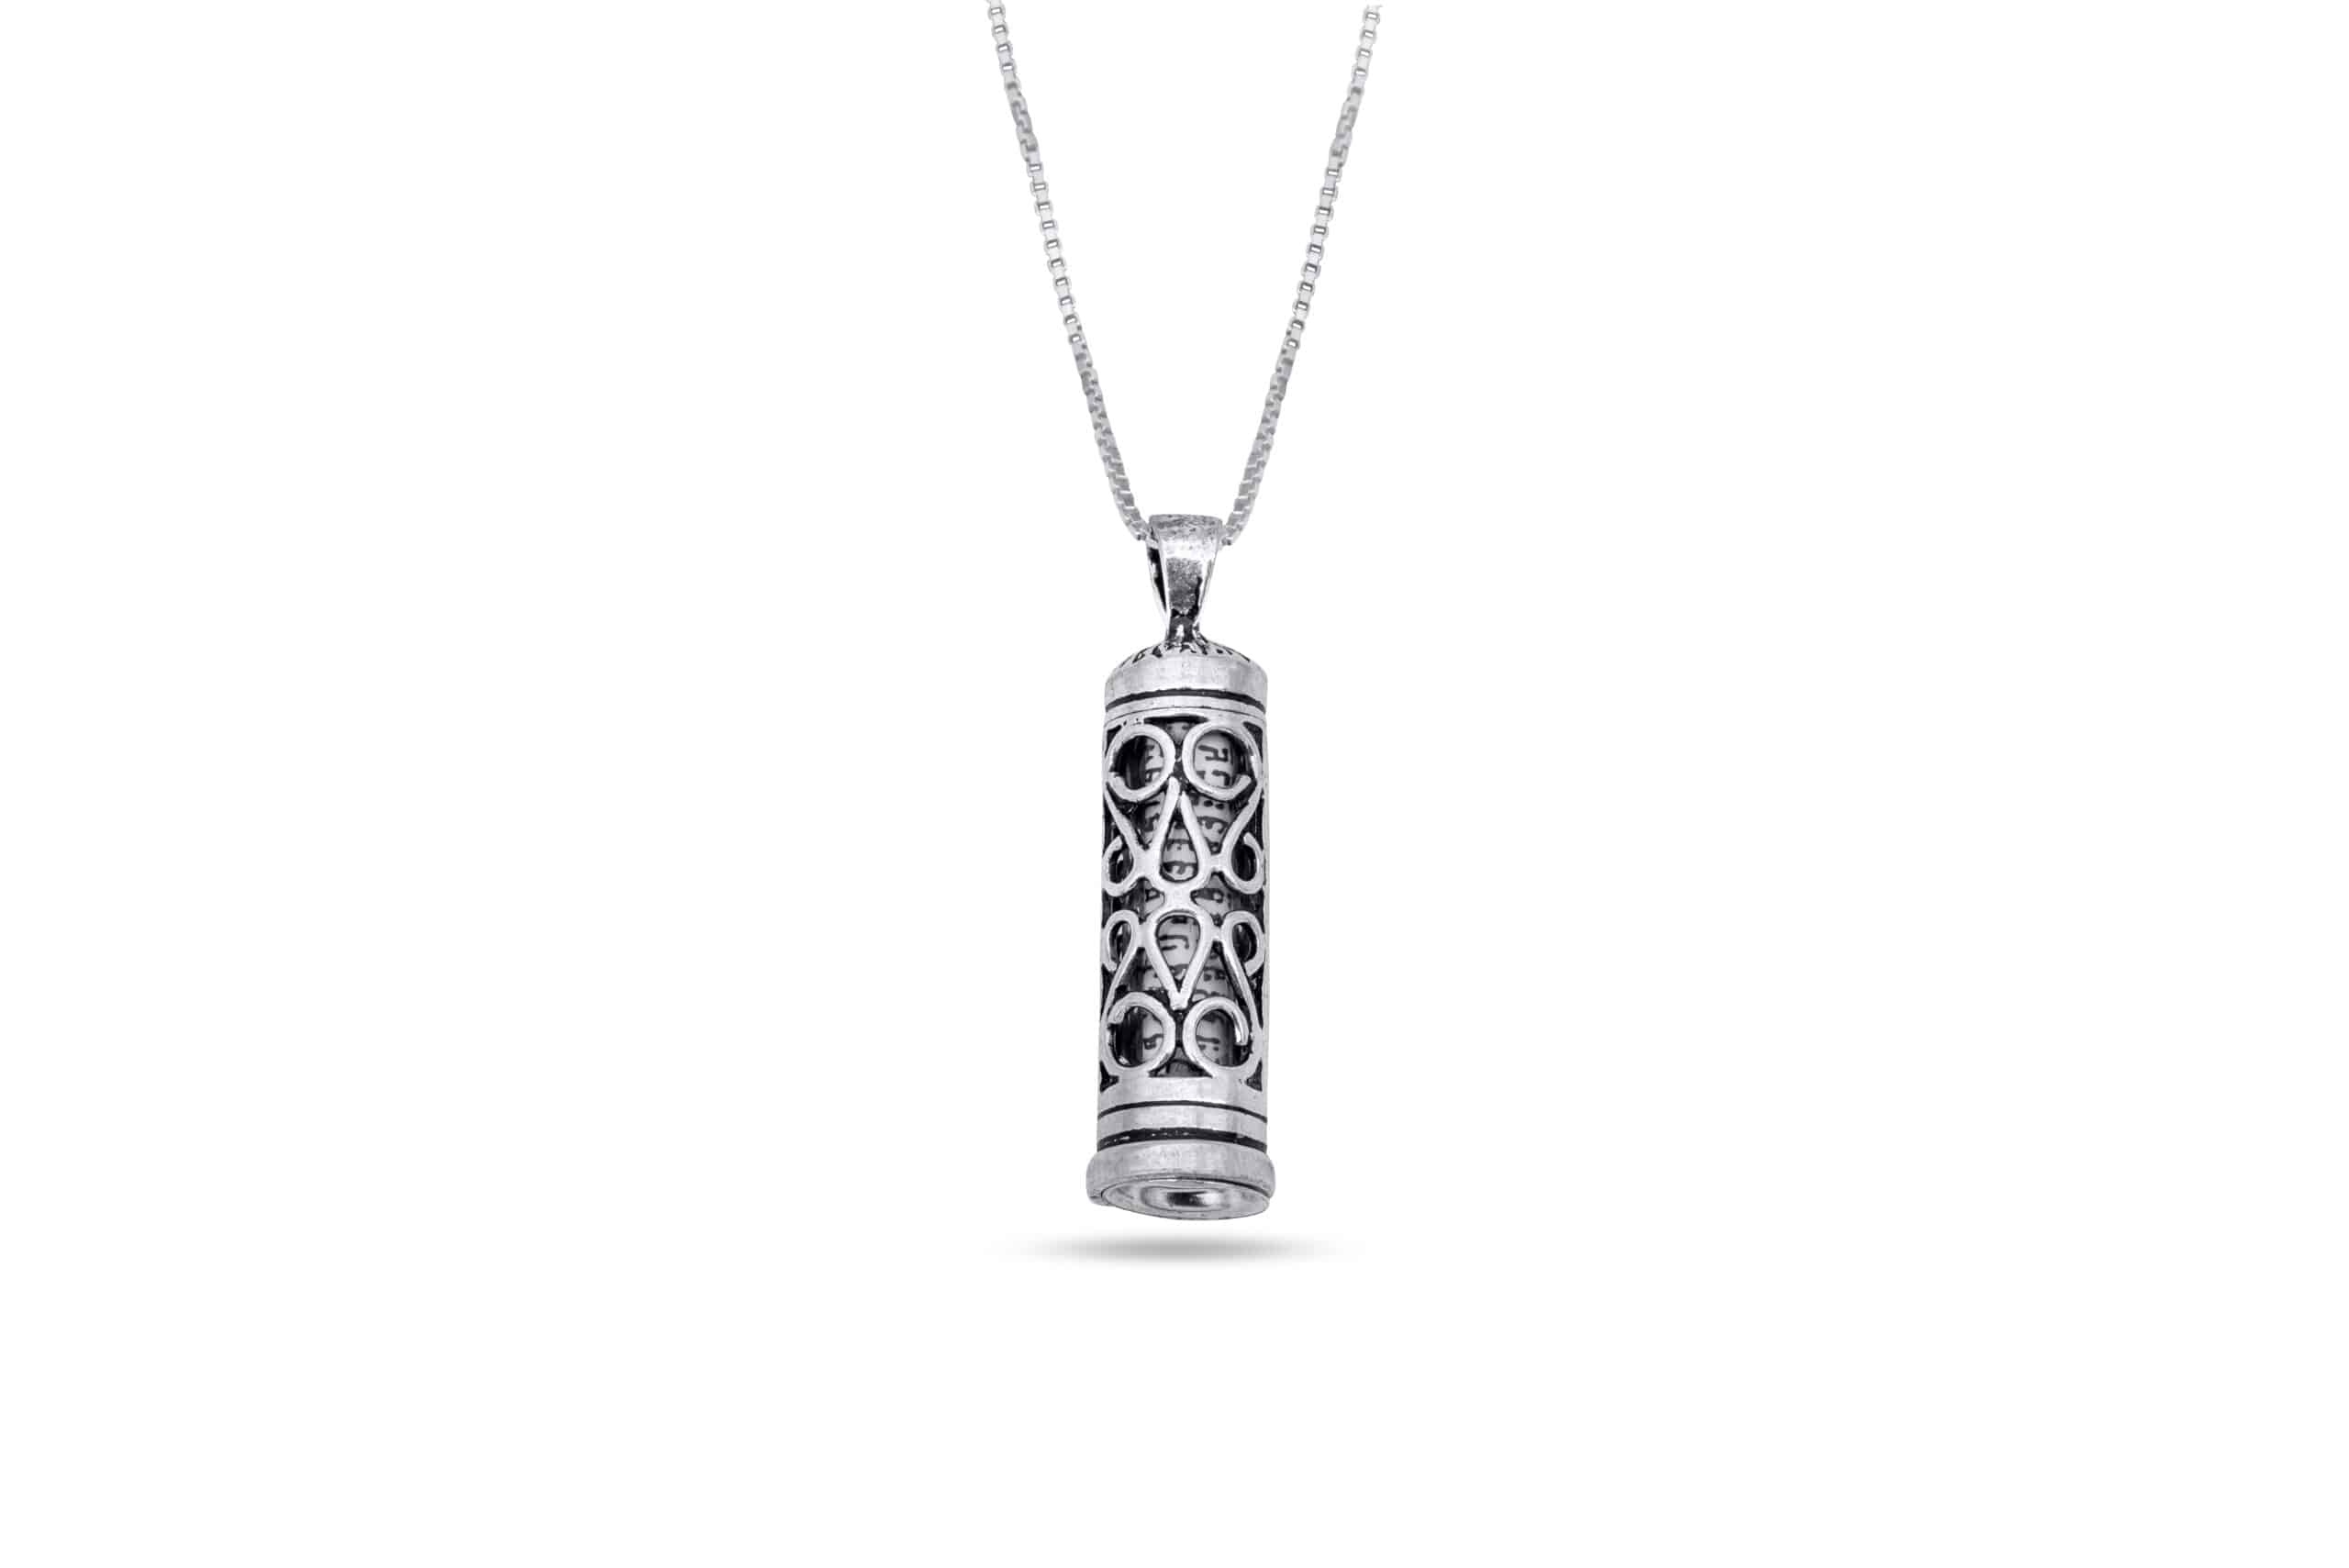 Sterling Silver Mezuzah Pendant with Filigree Decorations